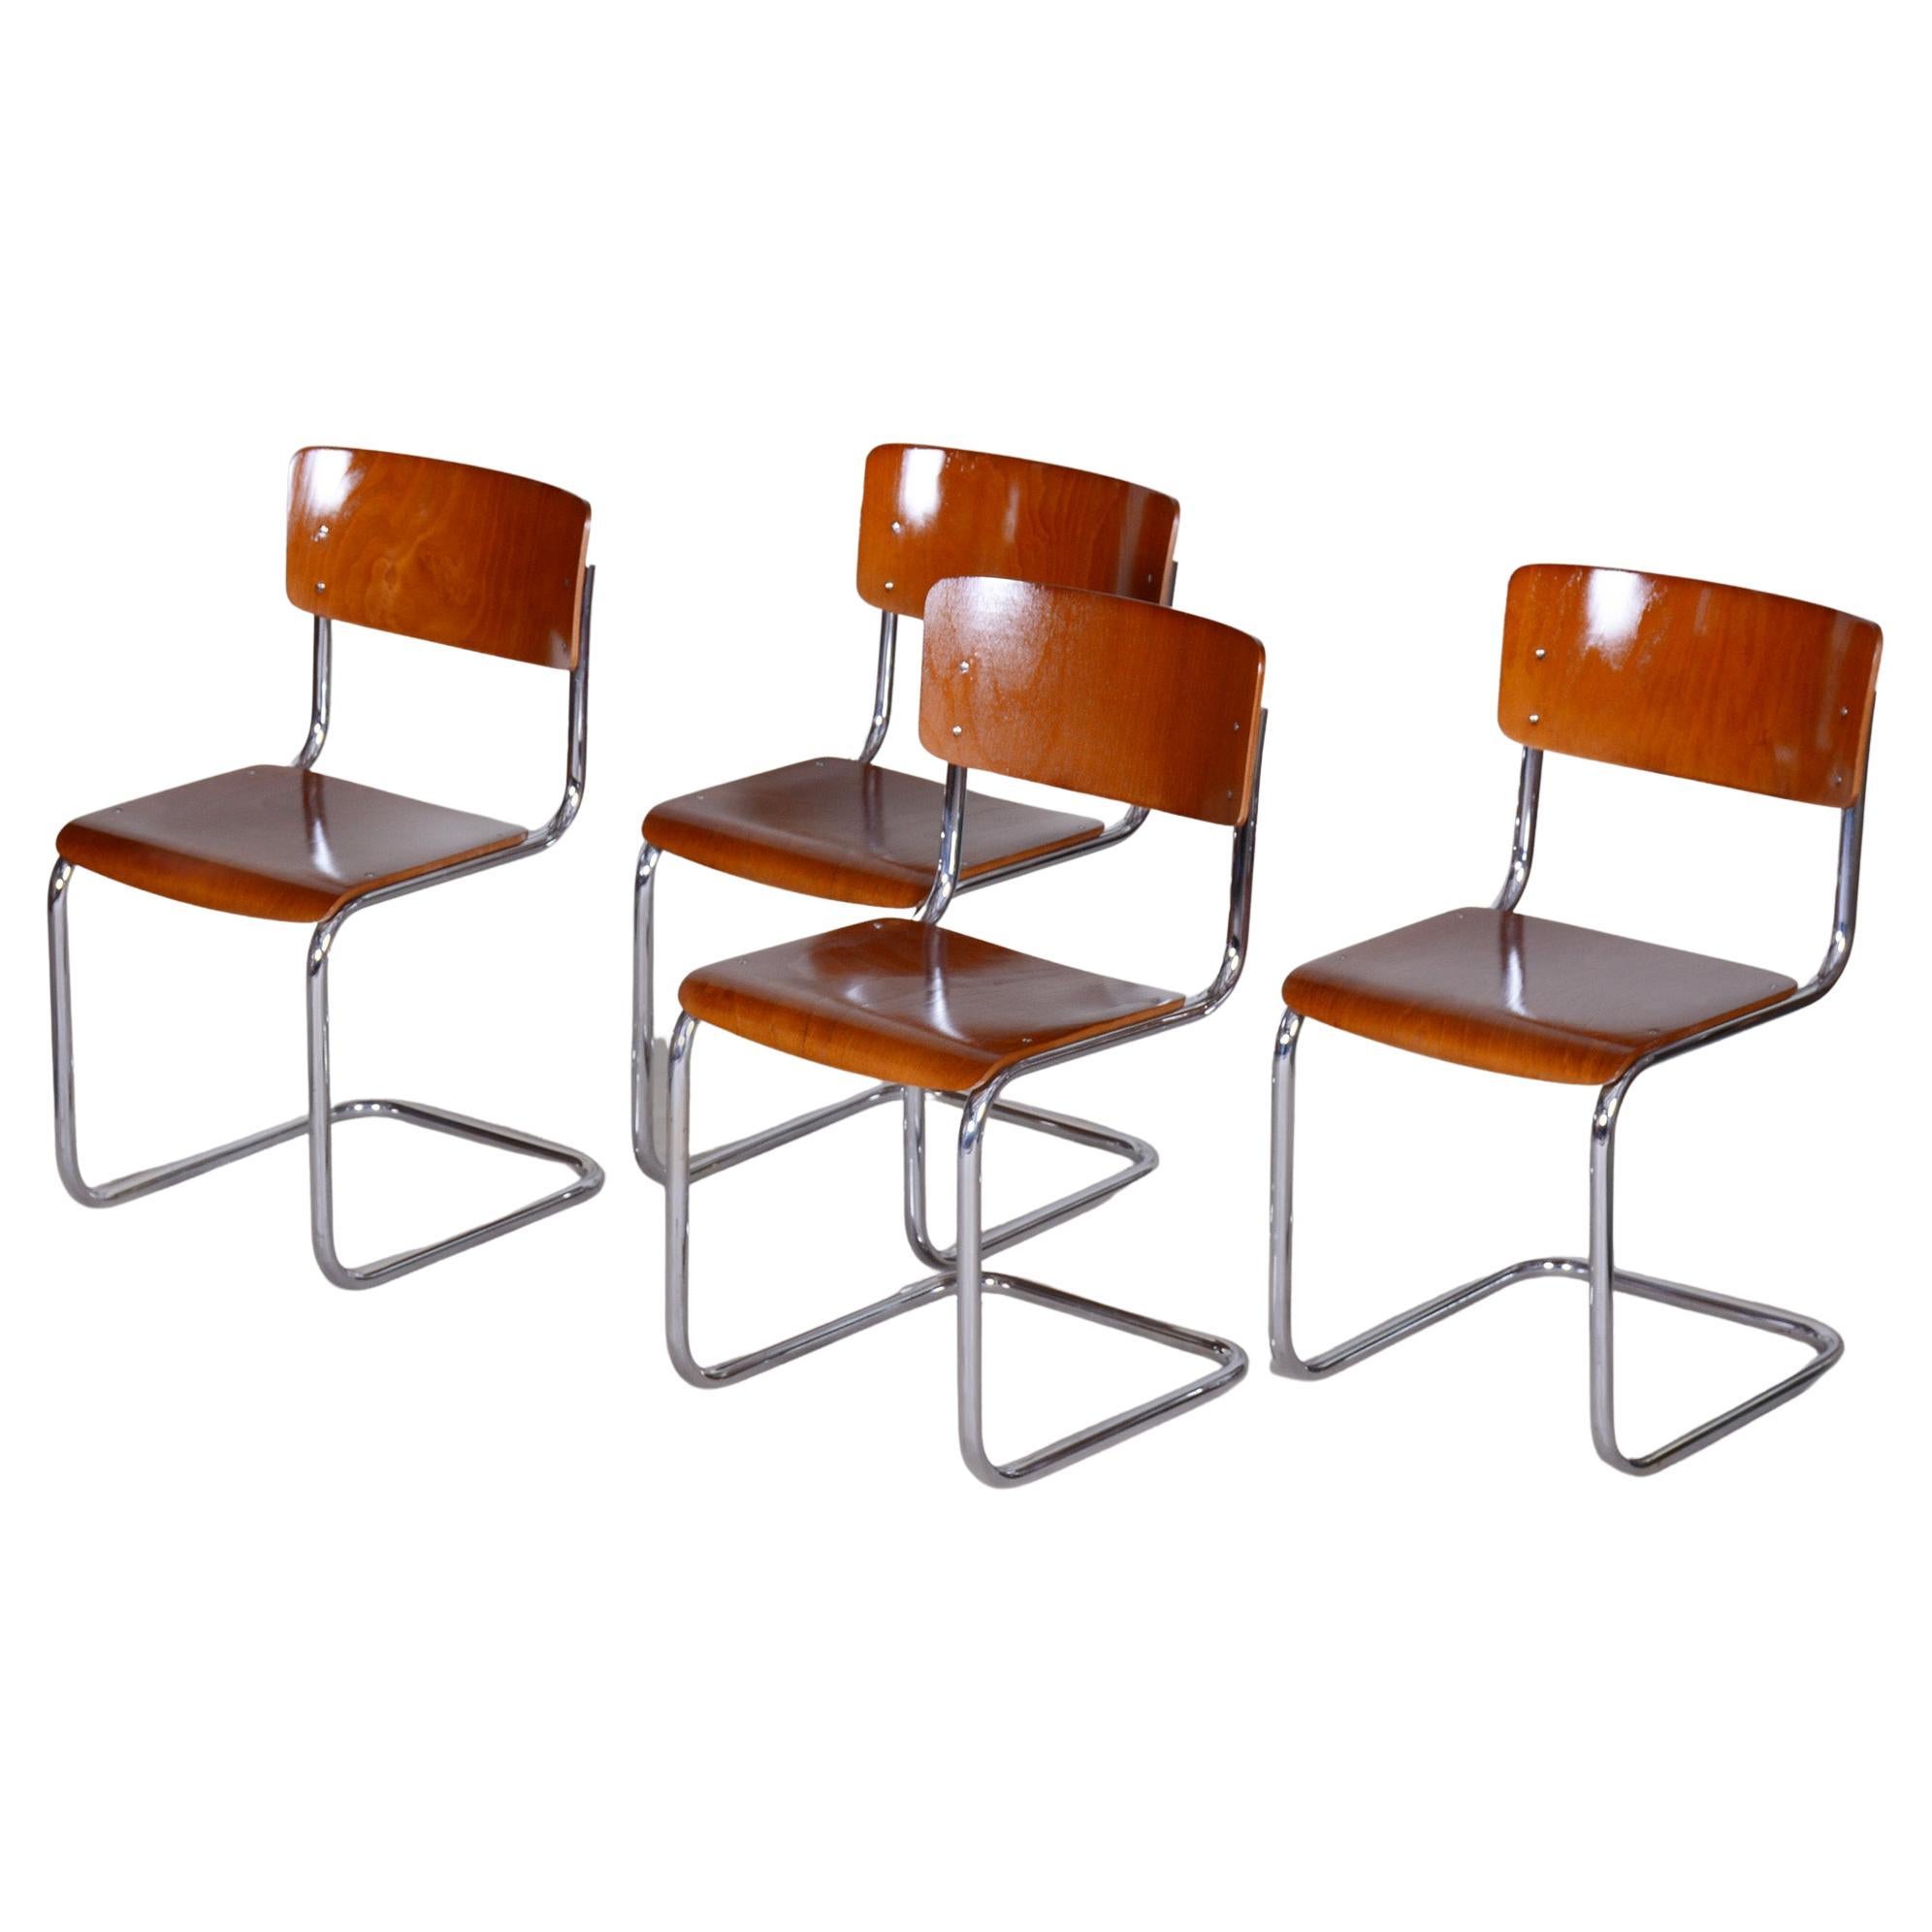 Set of Four Bauhaus Beech Chairs, Restored, Germany, 1930s For Sale